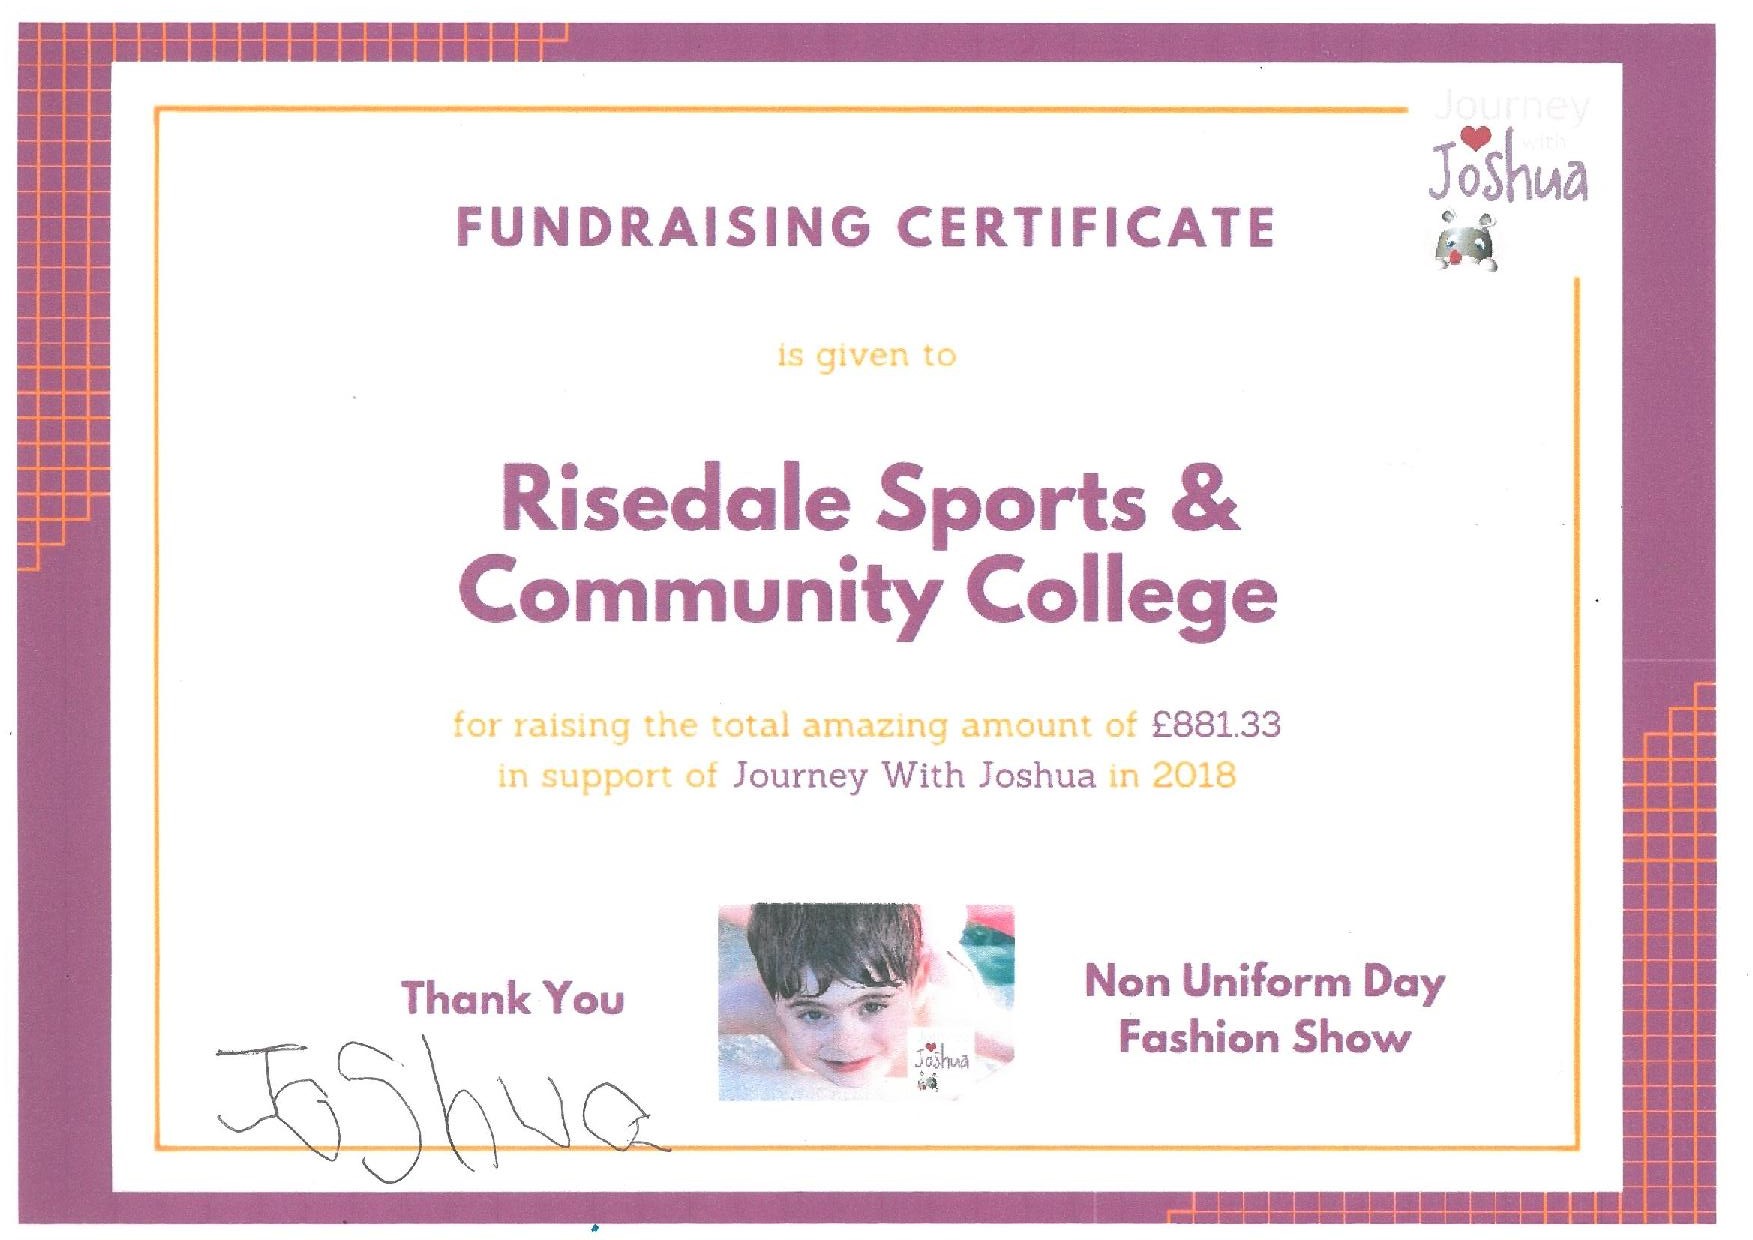 In 2018 Risedale raised an amazing total of £881.33 for Journey with Joshua and received this certificate signed by Joshua himself!